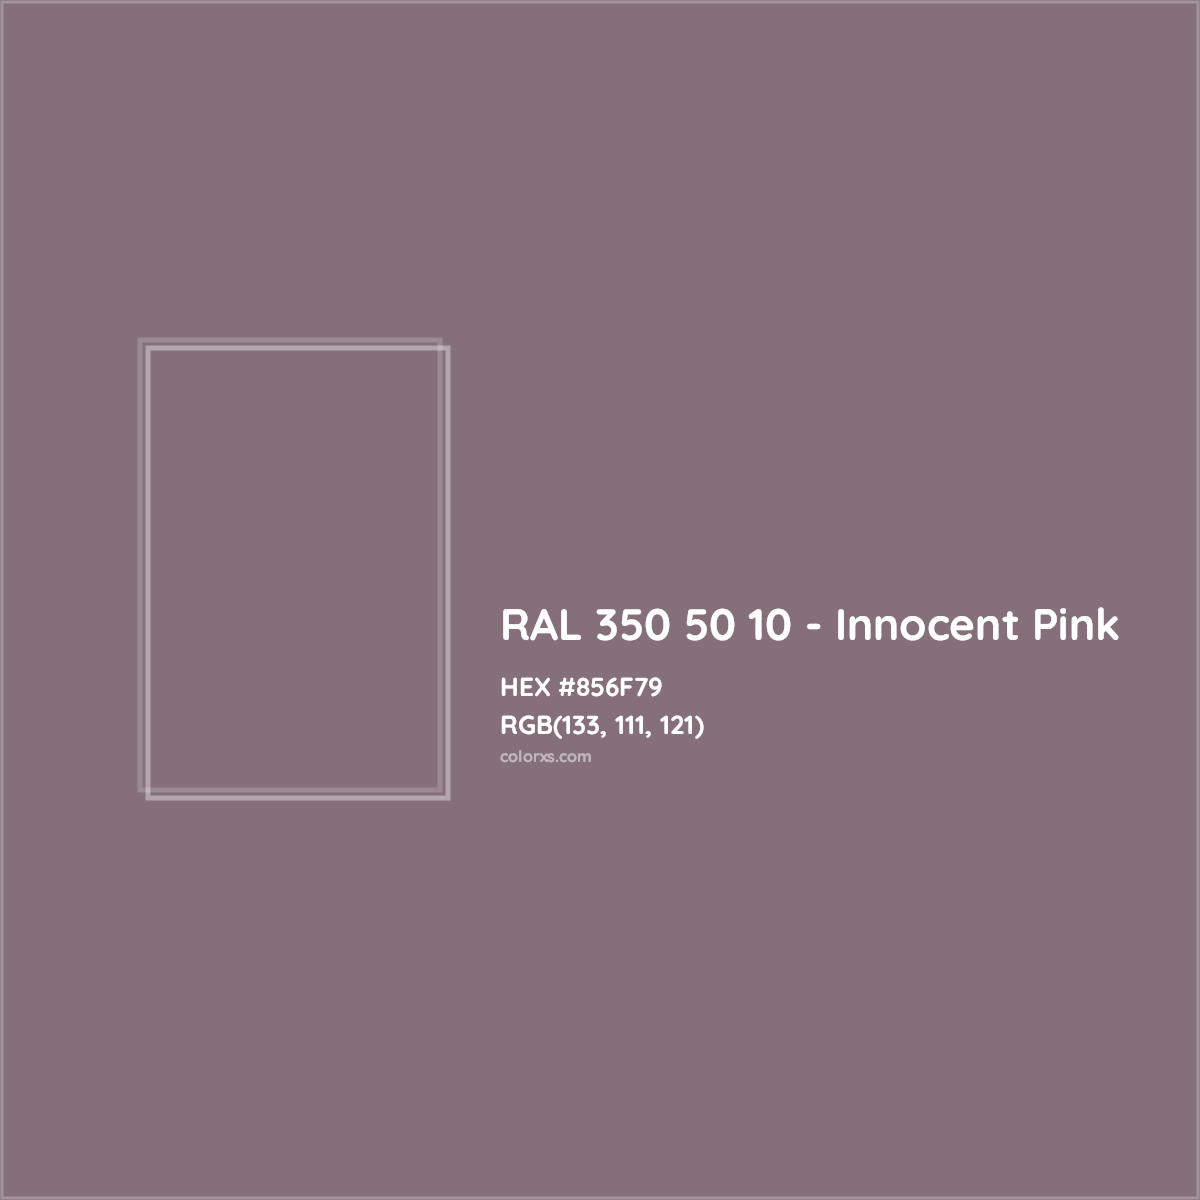 HEX #856F79 RAL 350 50 10 - Innocent Pink CMS RAL Design - Color Code